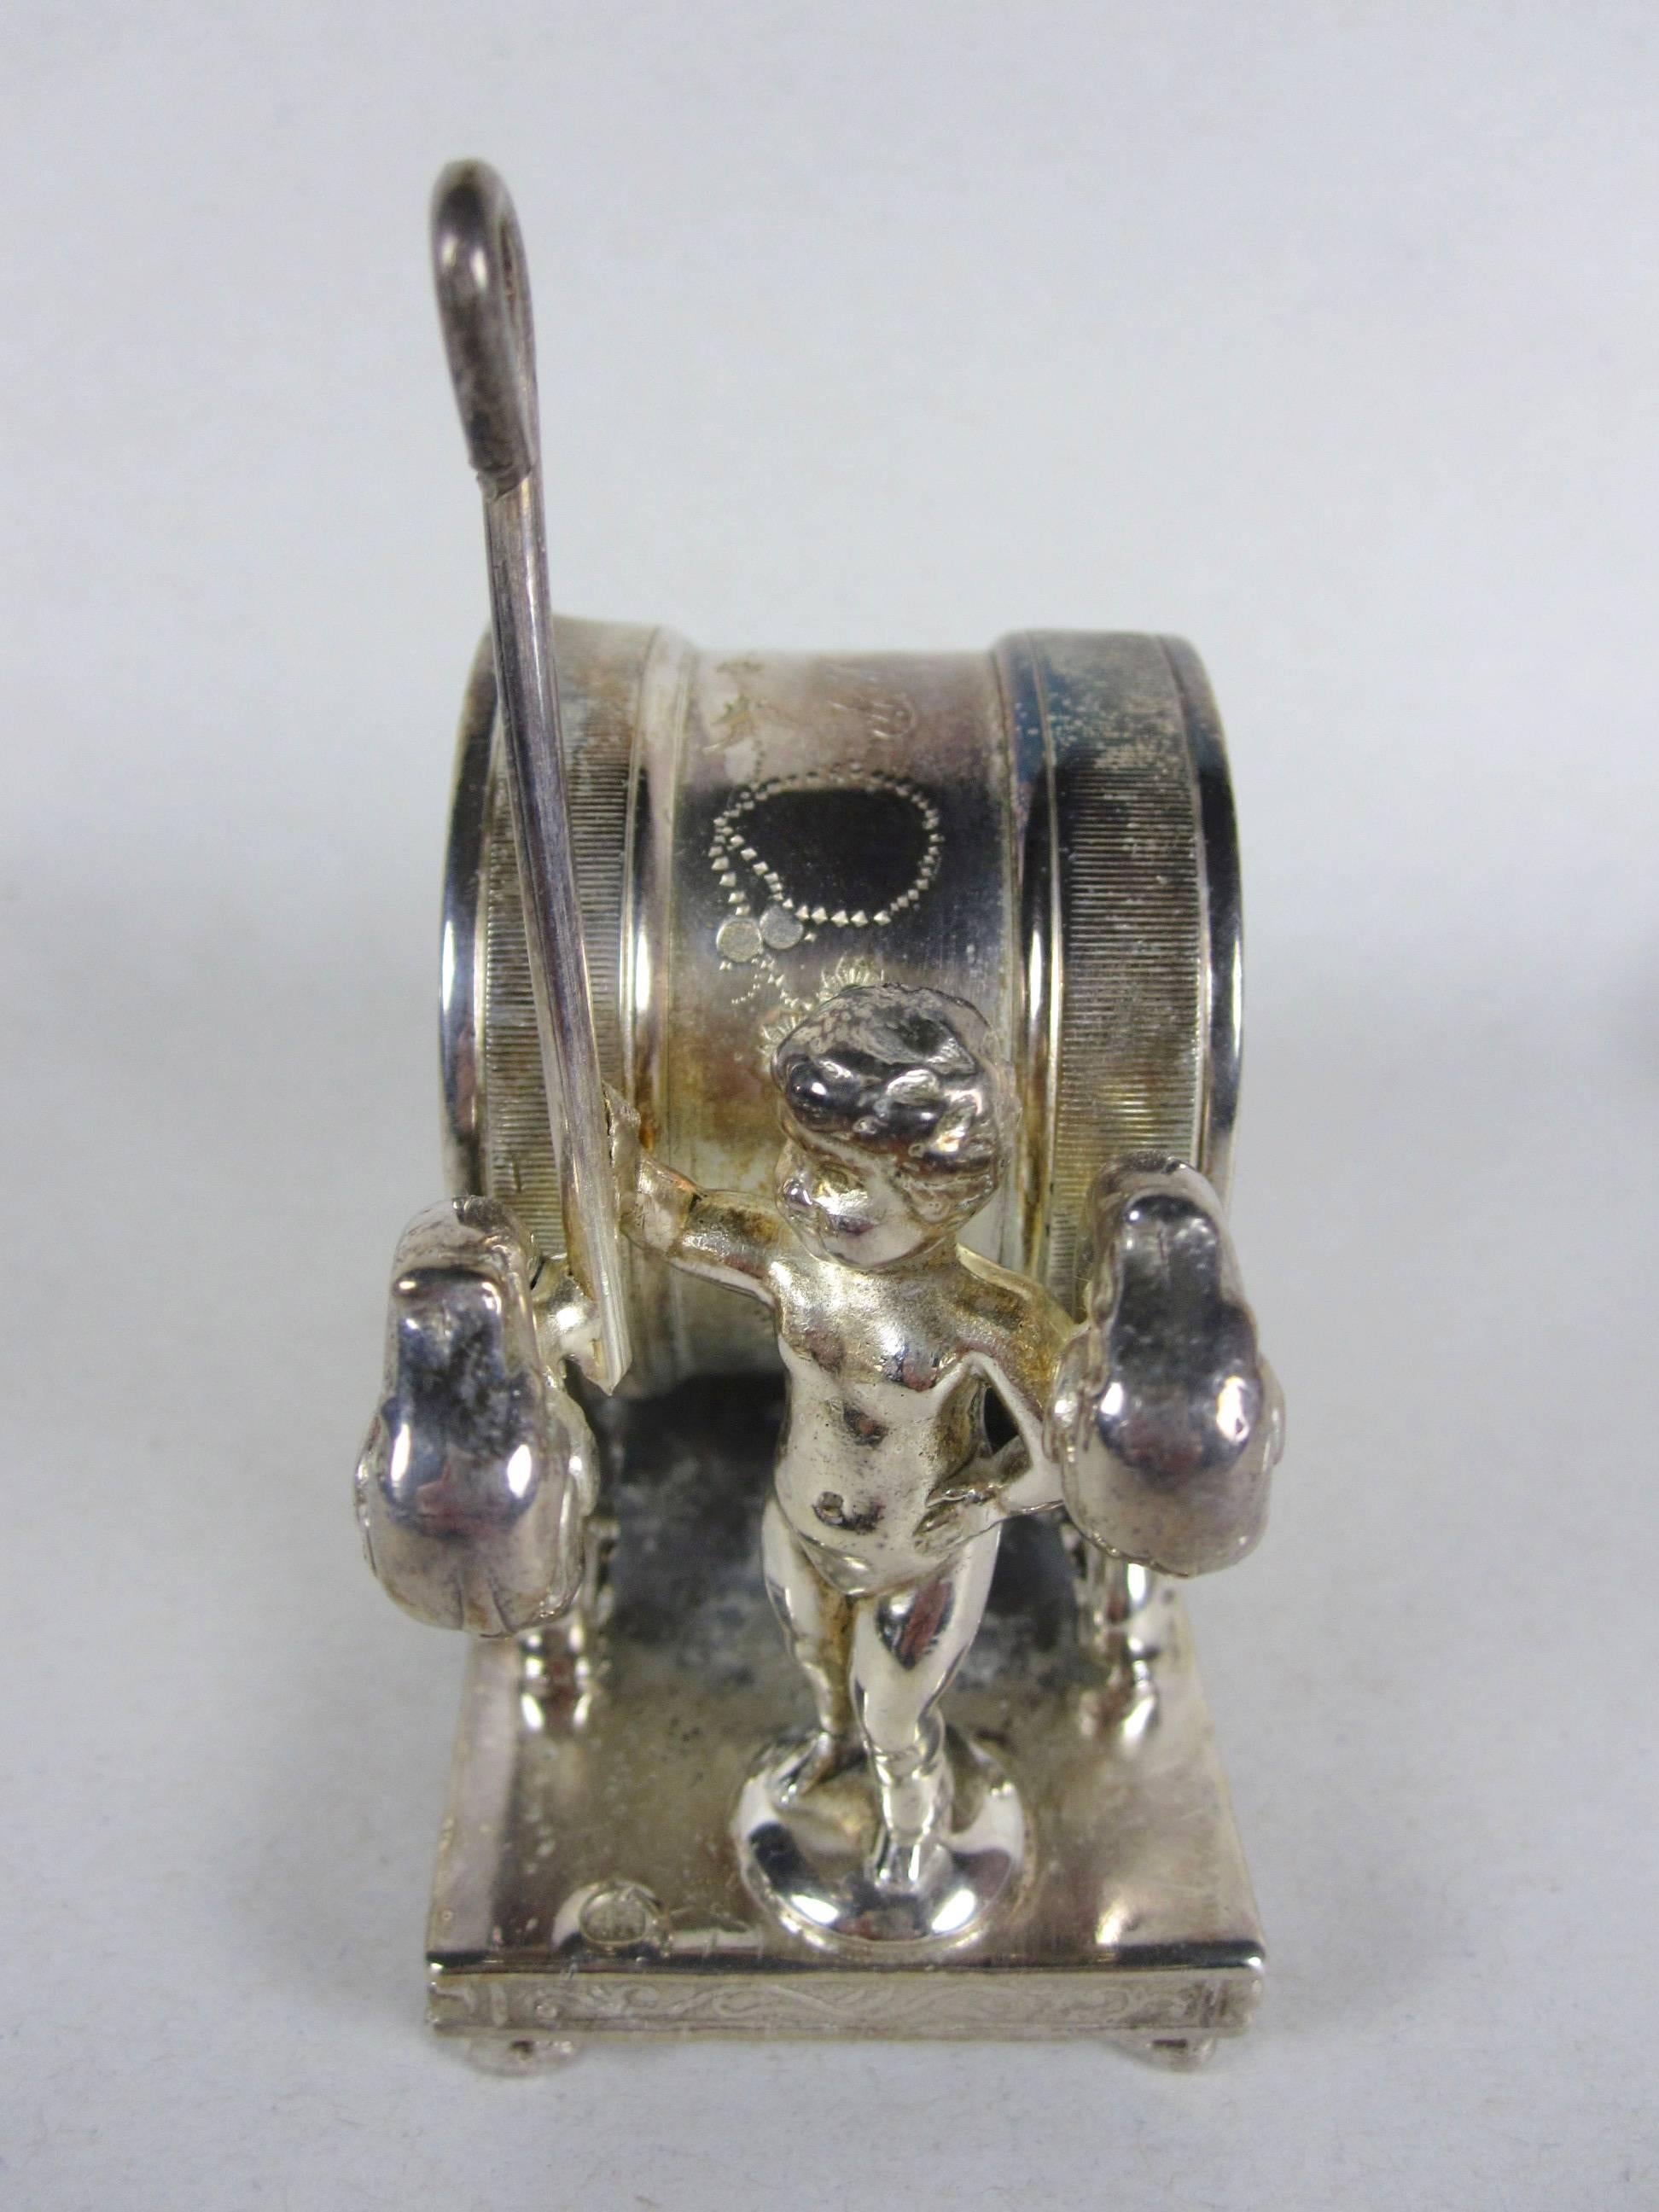 An antique Victorian era silver plate standing napkin ring place holder with a marching putto holding a staff, in front of an engraved barrel ring on a scrolled and ornate rimmed base. Initialed EBP. 

Dating from 1890-1910. Marked “Wilcox Silver